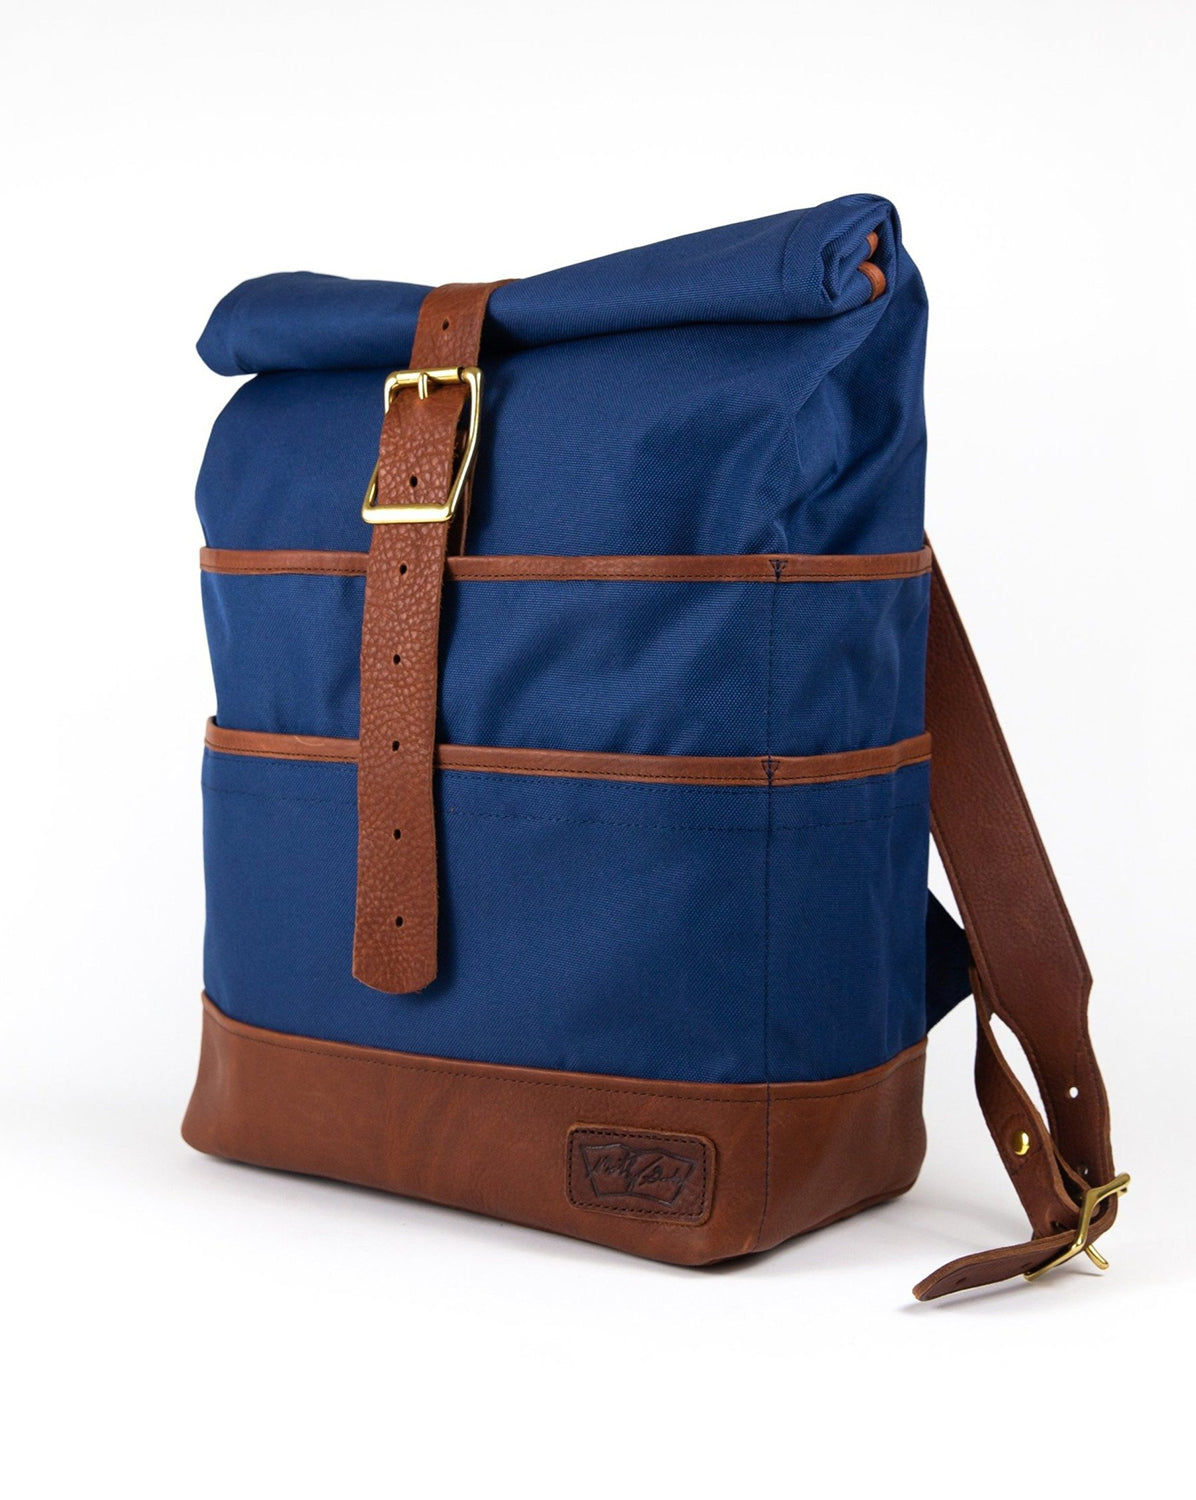 Weekender in Navy with Brown Leather  CLOSEOUT COLOR...20% OFF SALE! - Motley Goods